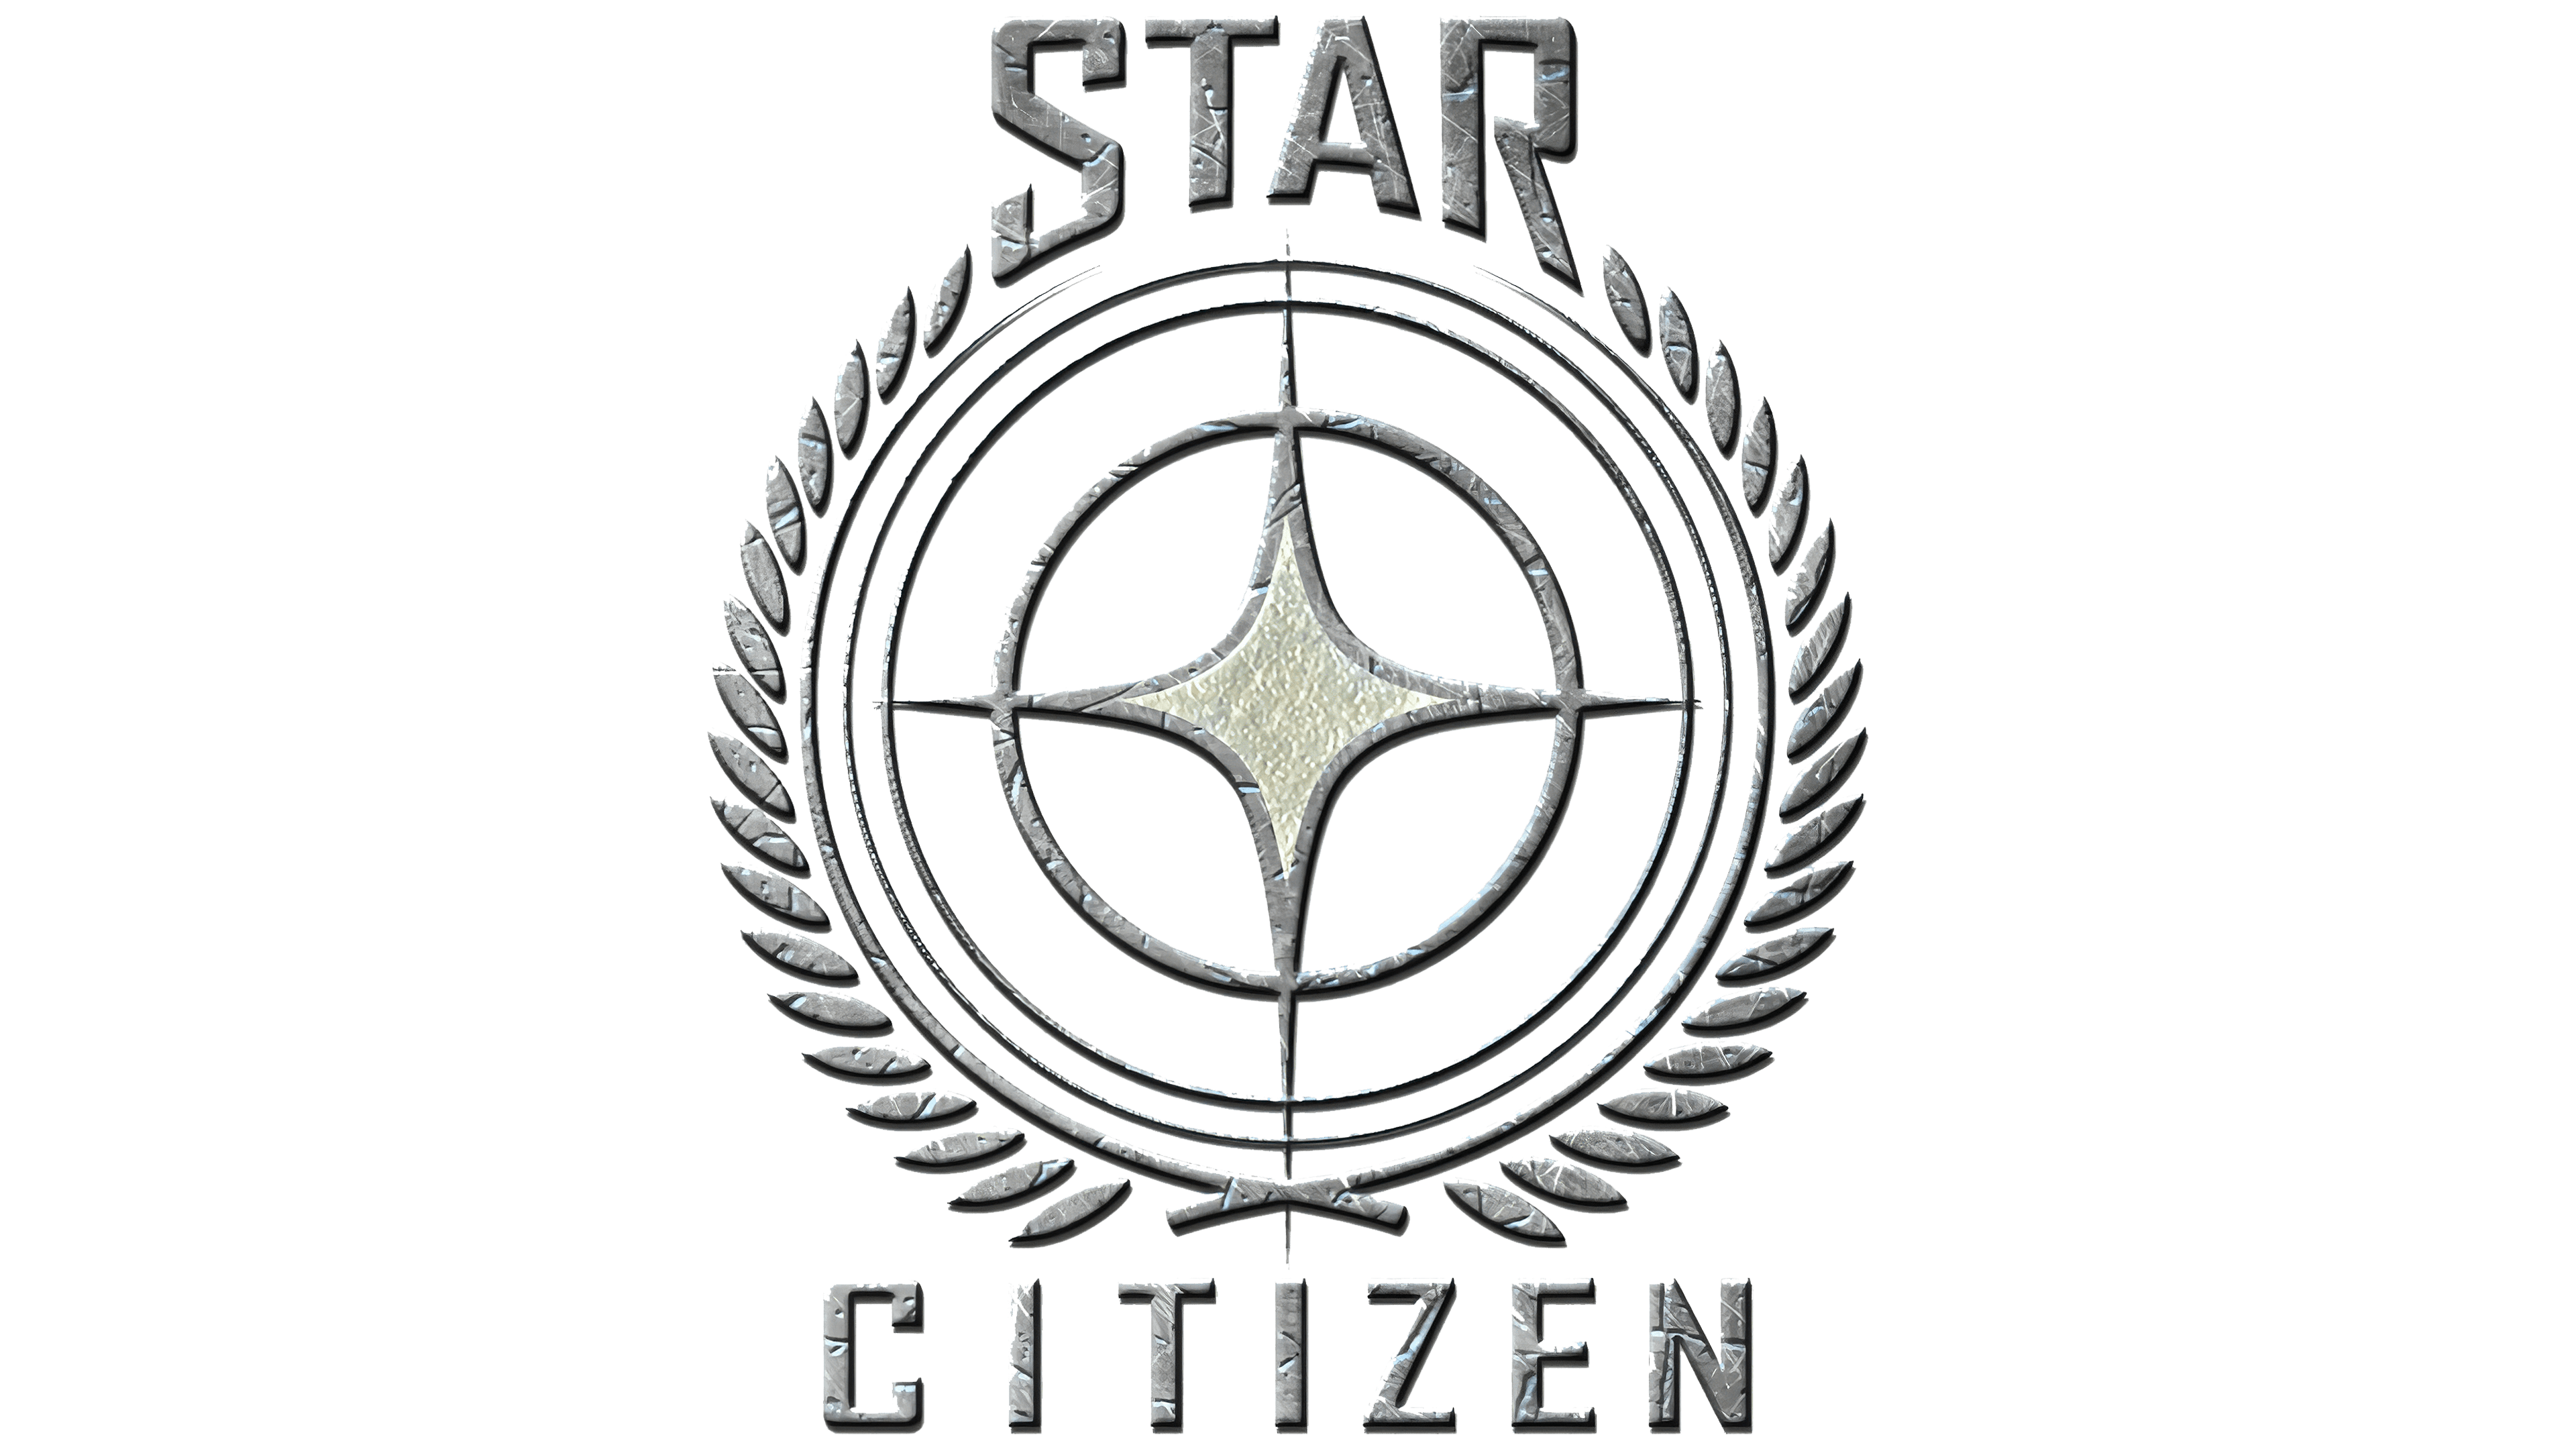 star citizen call to arms download free